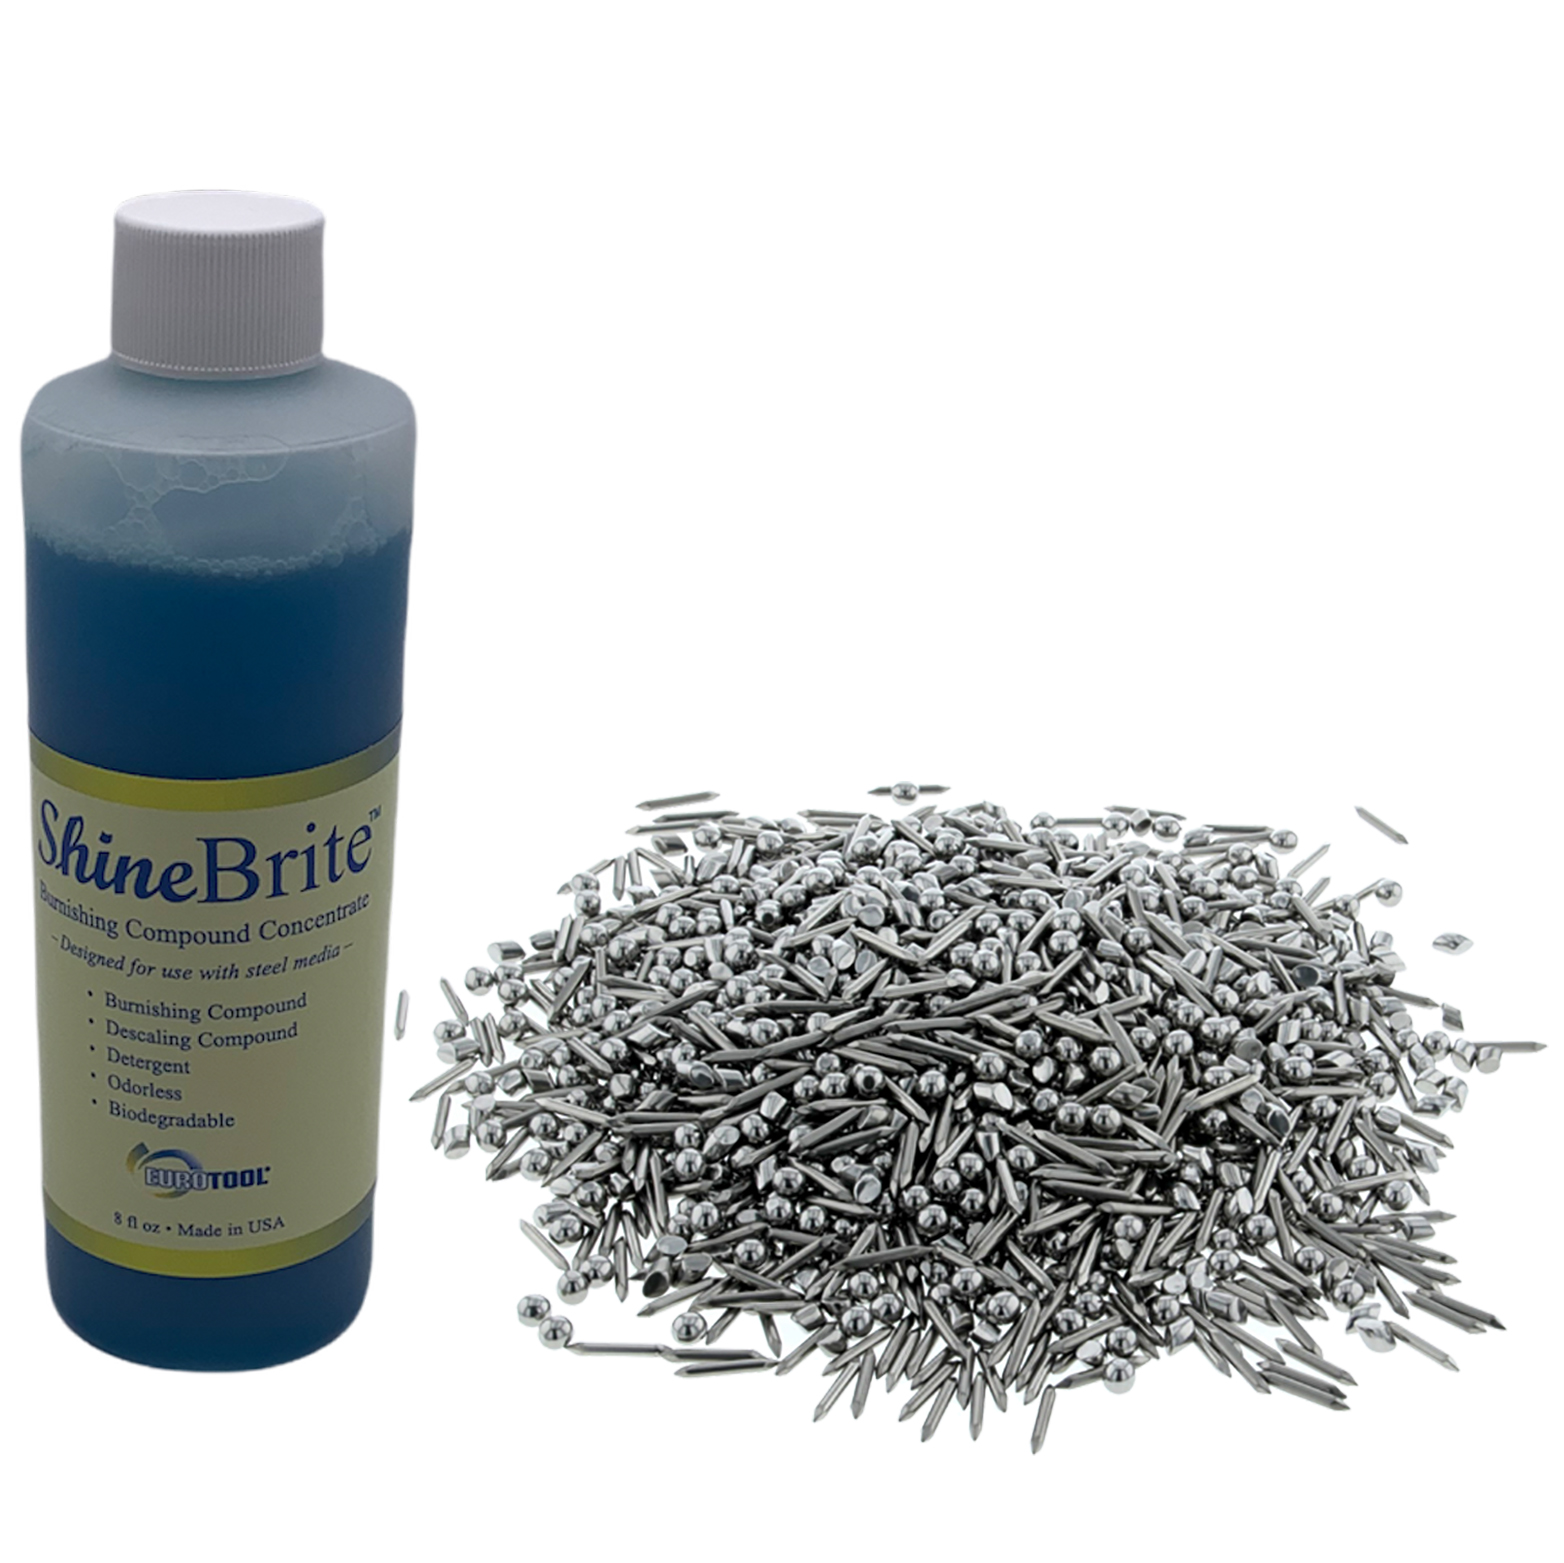 Shinebrite Silver Dip Cleaner - 8 Oz Jewelry Silver Metal